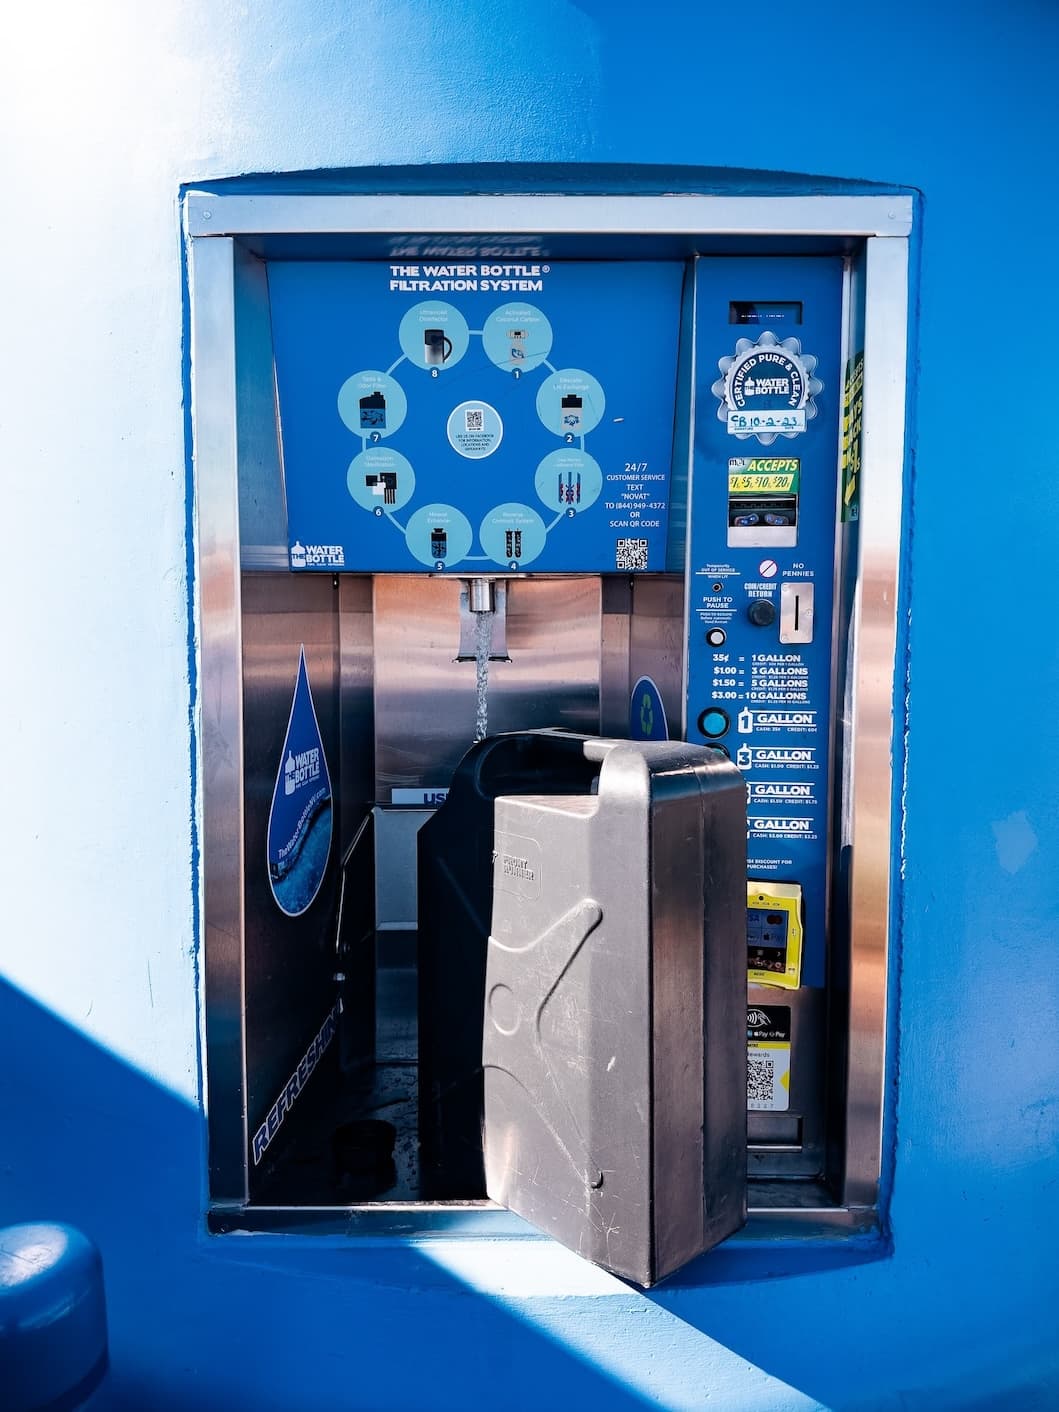 A water bottle refill station with a filtration system set into a bright blue wall, offering various payment options and water amounts.